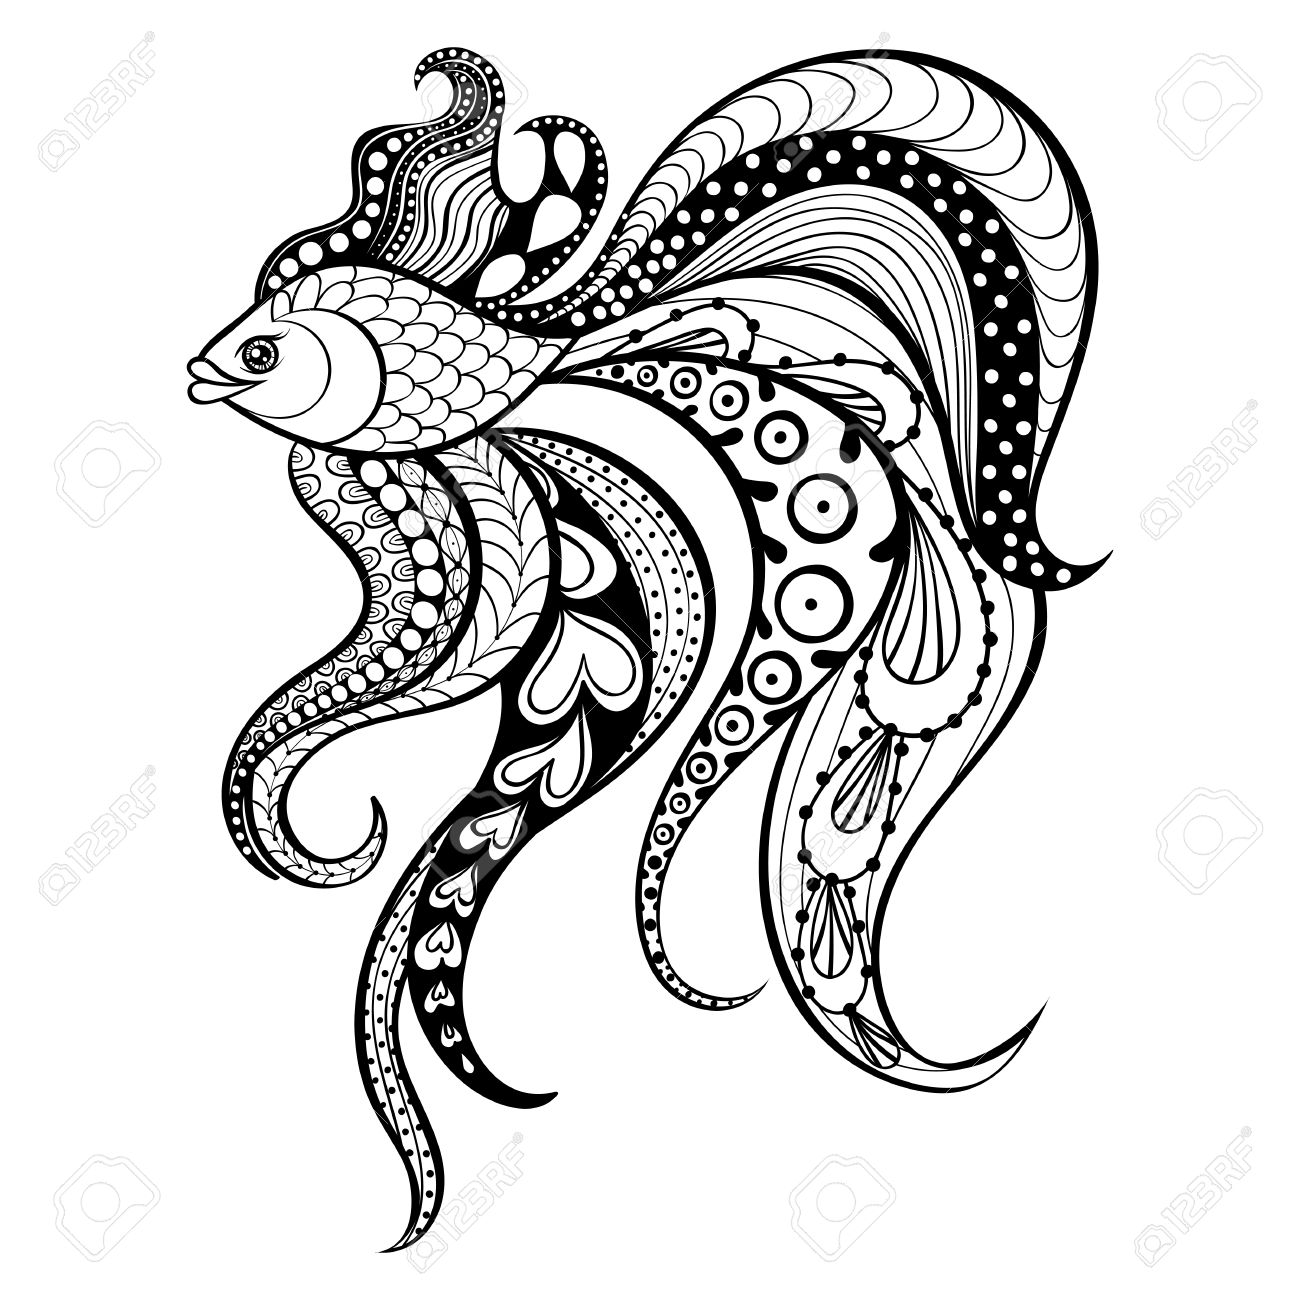 Fish Adult Coloring Pages at GetColorings.com | Free printable ...